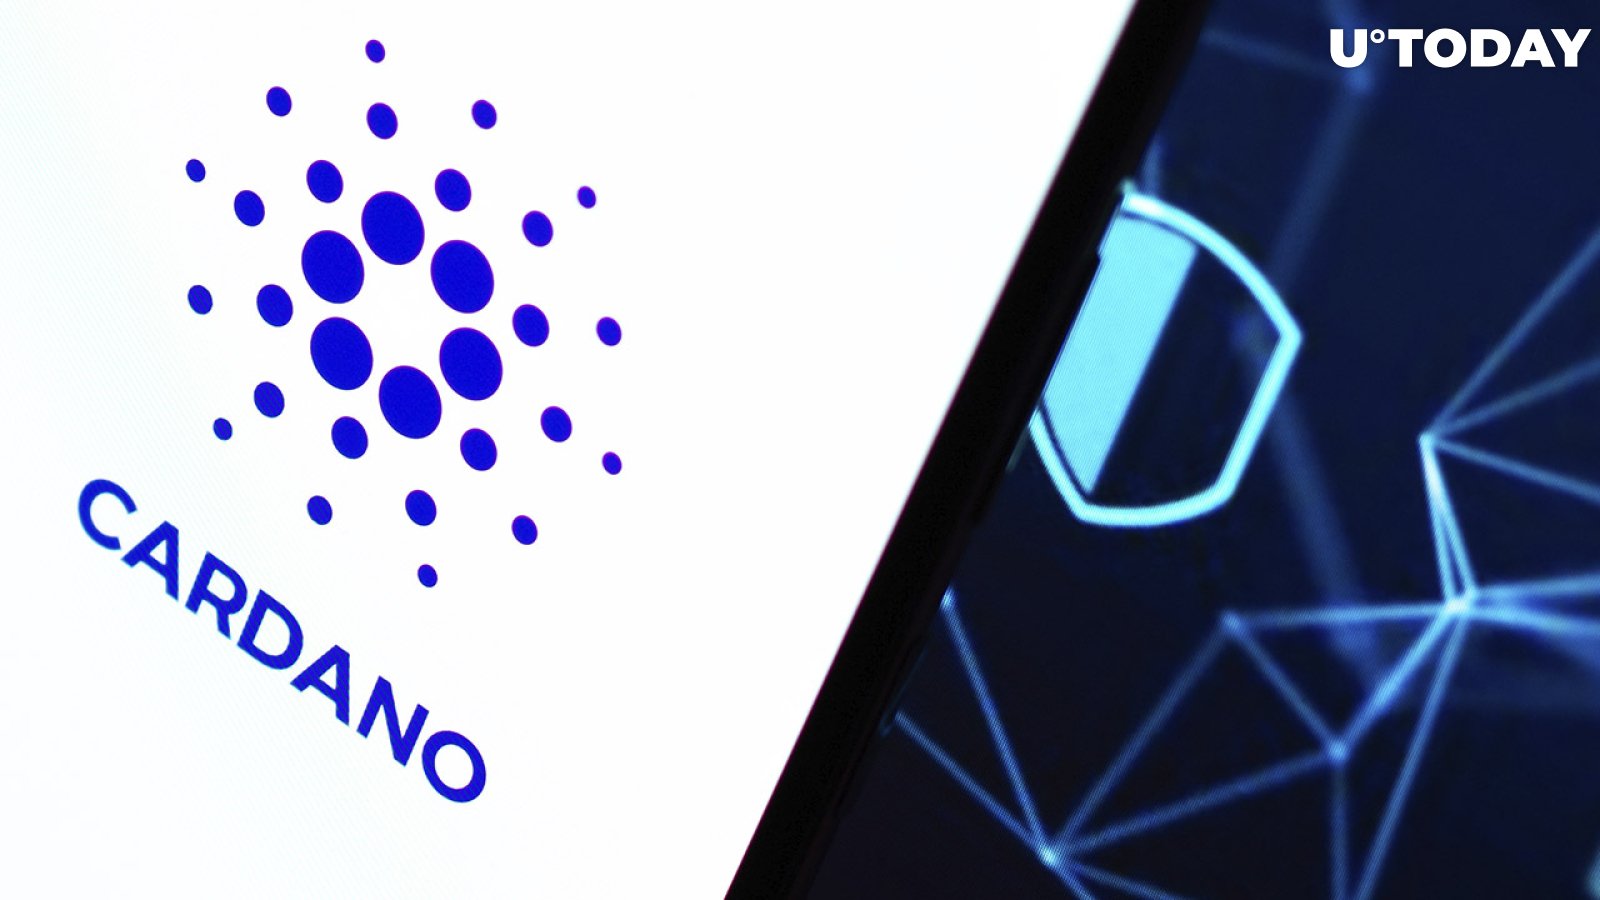 Cardano Sees Significant Growth in On-Chain Activity as New Addresses Spike 167%